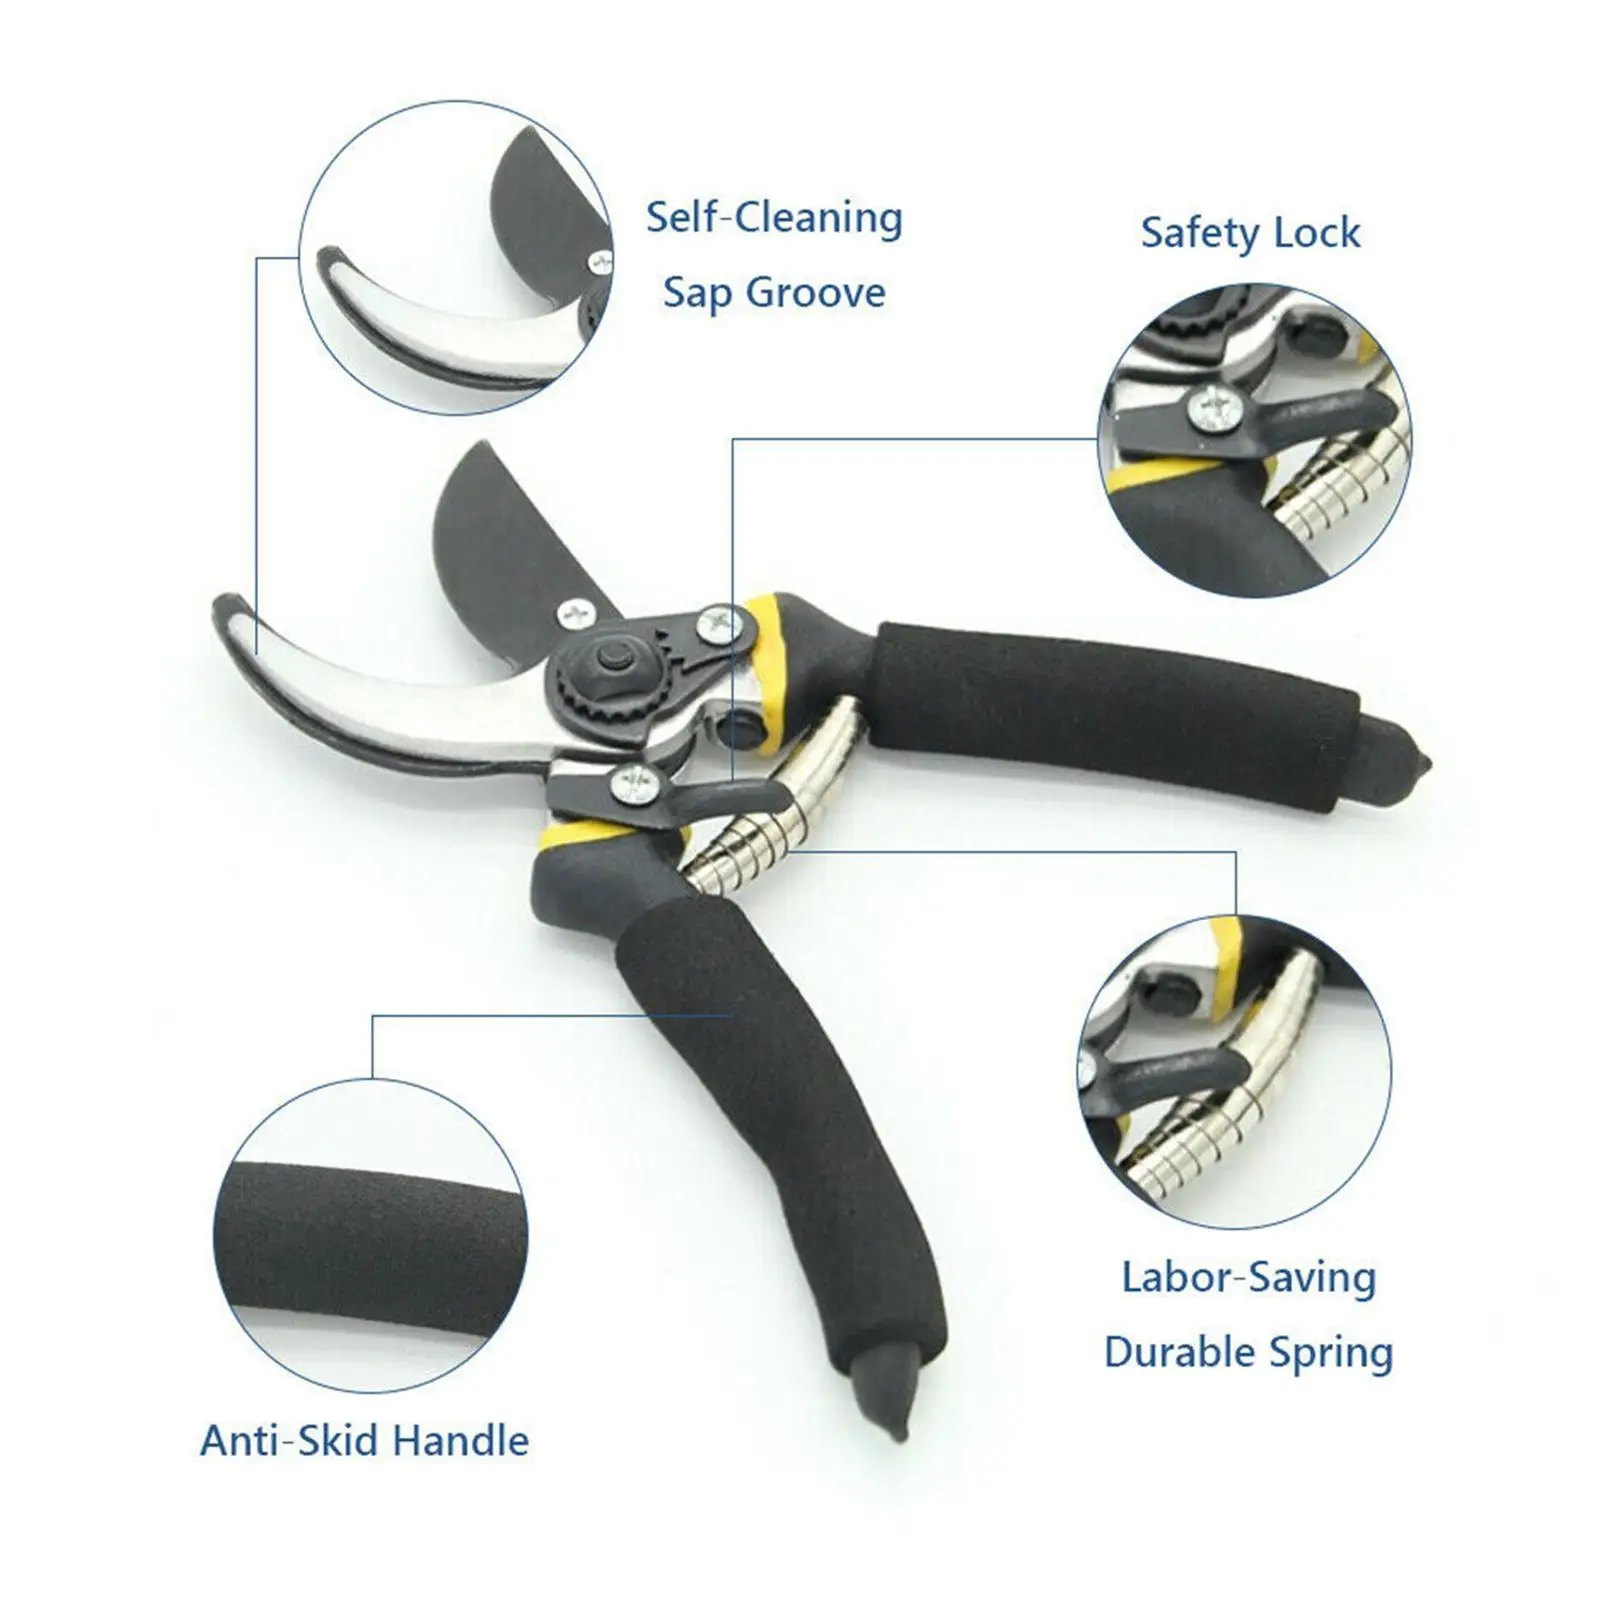 Garden Flower Pruning Shears, Tool, Gardening Clippers Scissors for Trimming Trees, Tools for Branches Plants